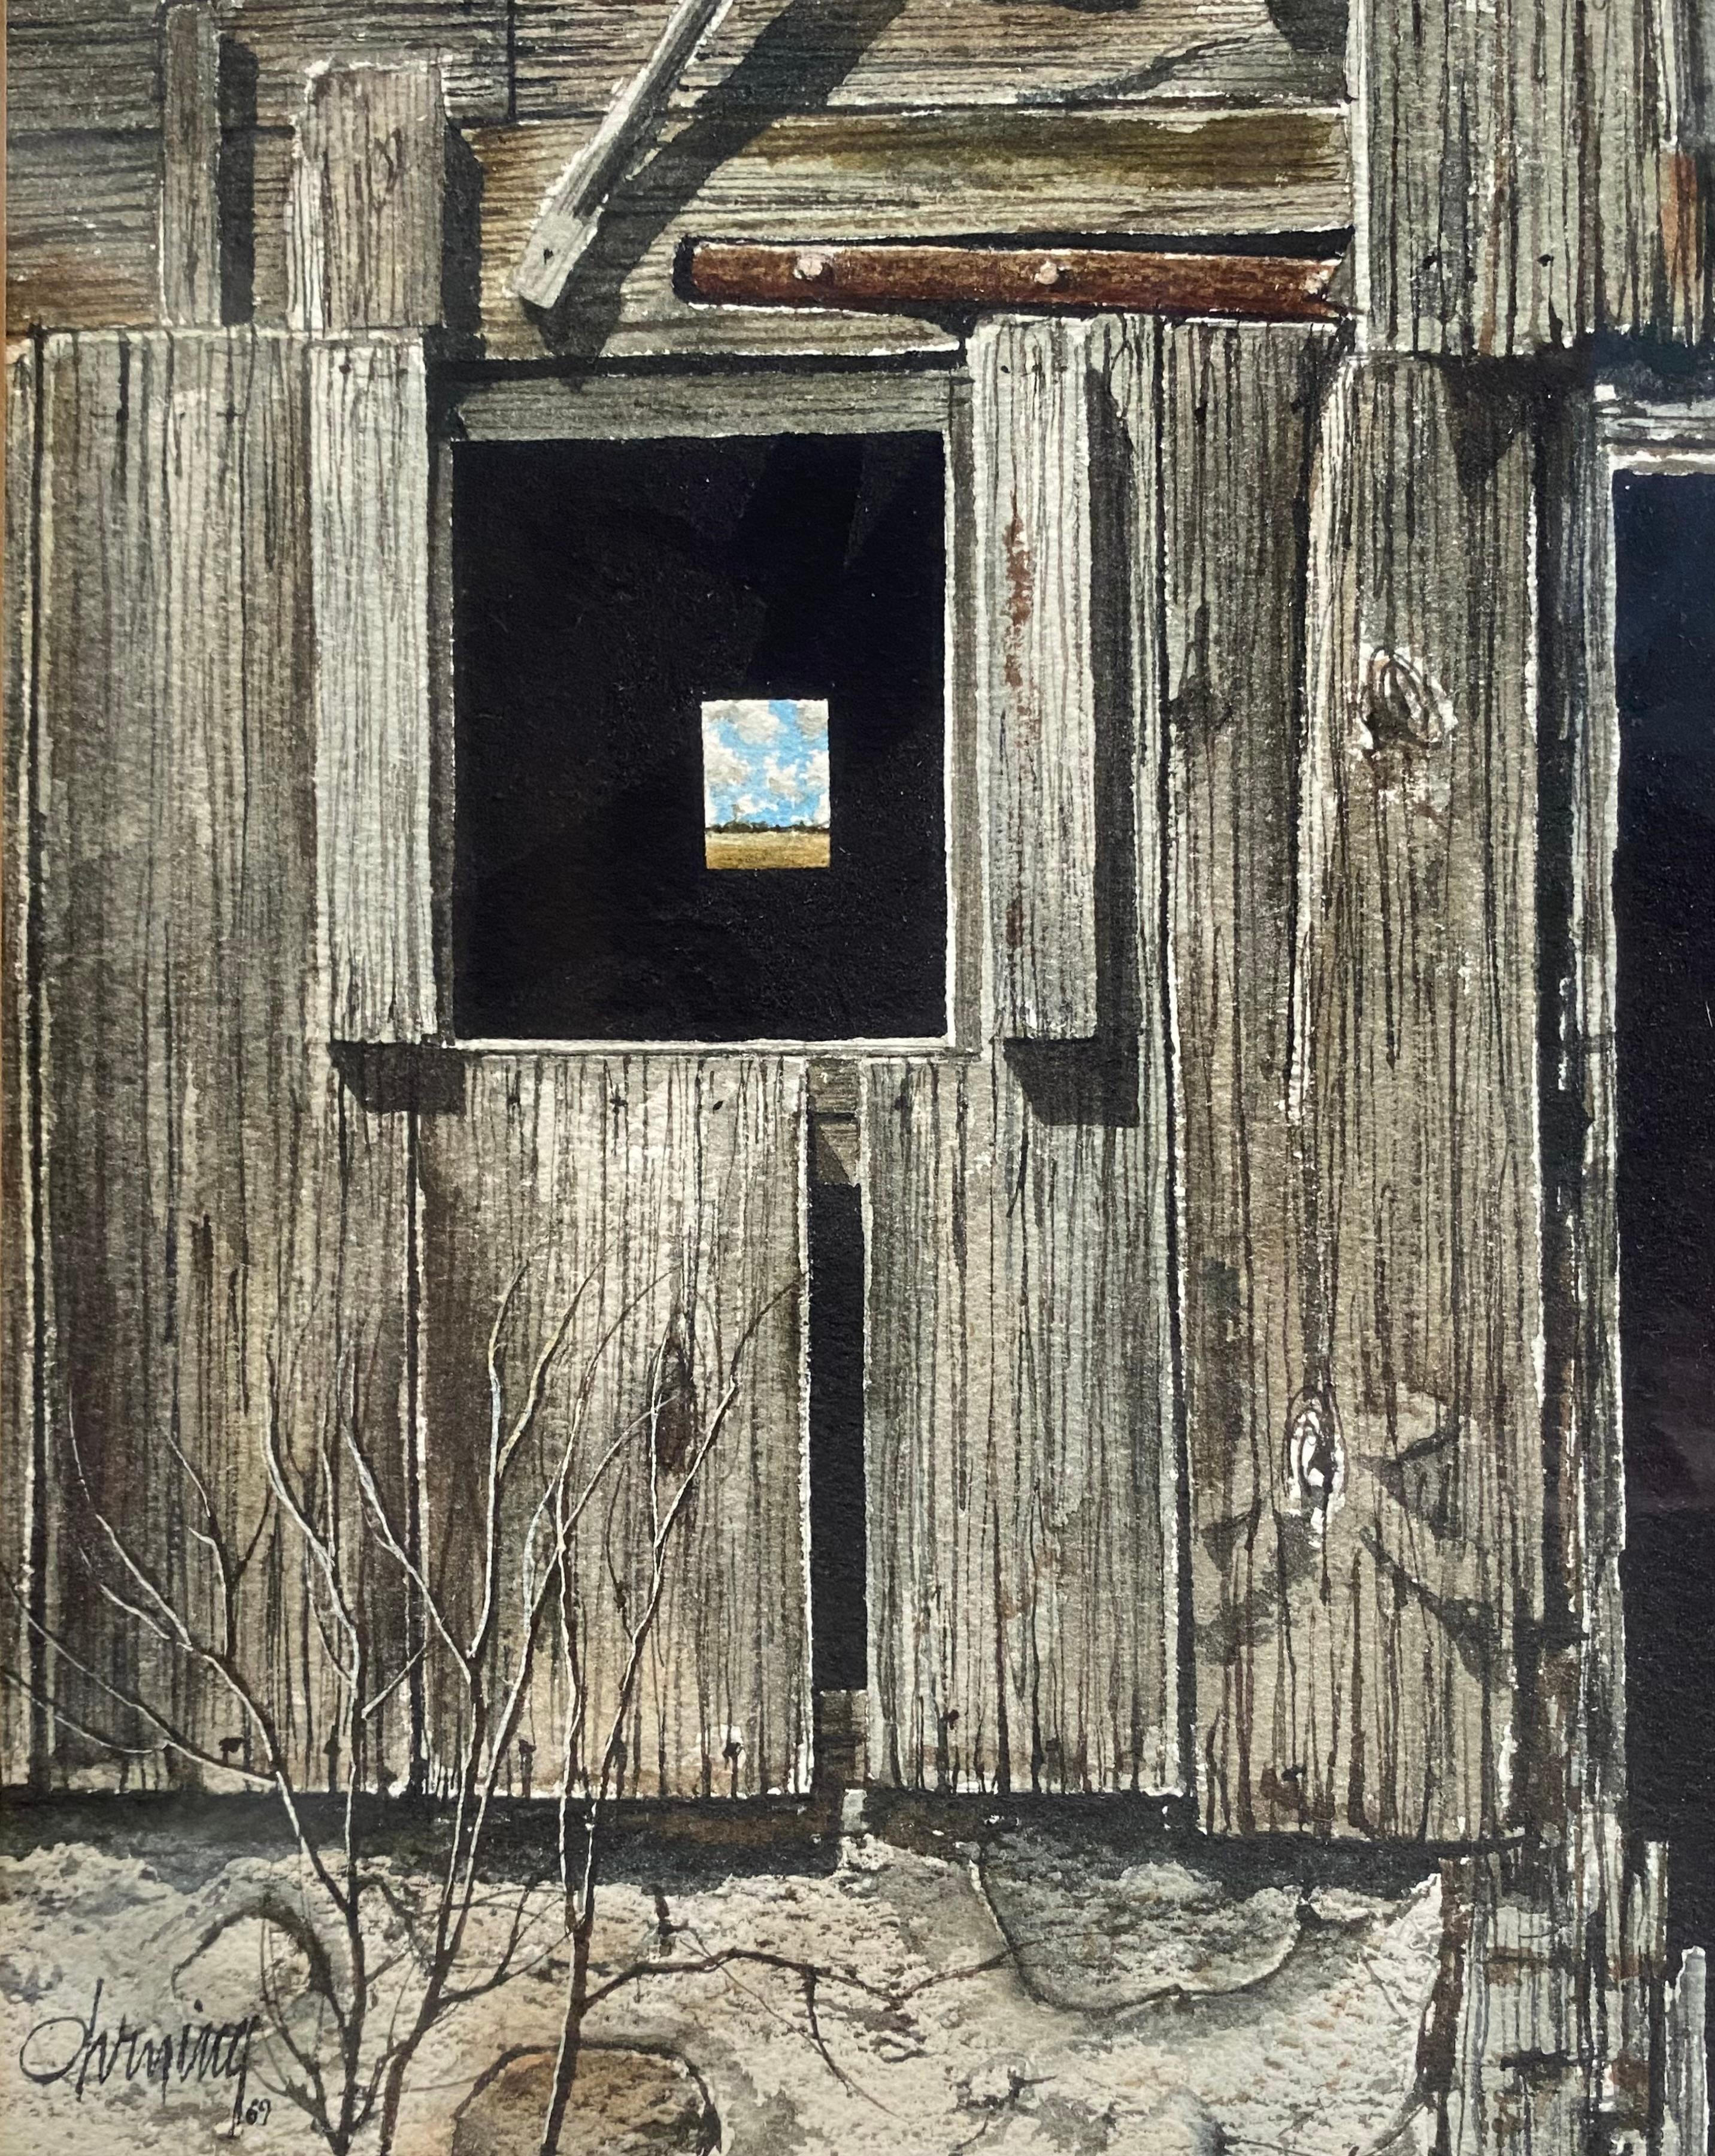 Beautifully executed super realistic watercolor on  archival paper of an open barn window and the outdoor view beyond. Done in a trompe L’oeil style. Signed and dated 1969 by the American artist Rudolph Ohrning lower left.  Under glass and in